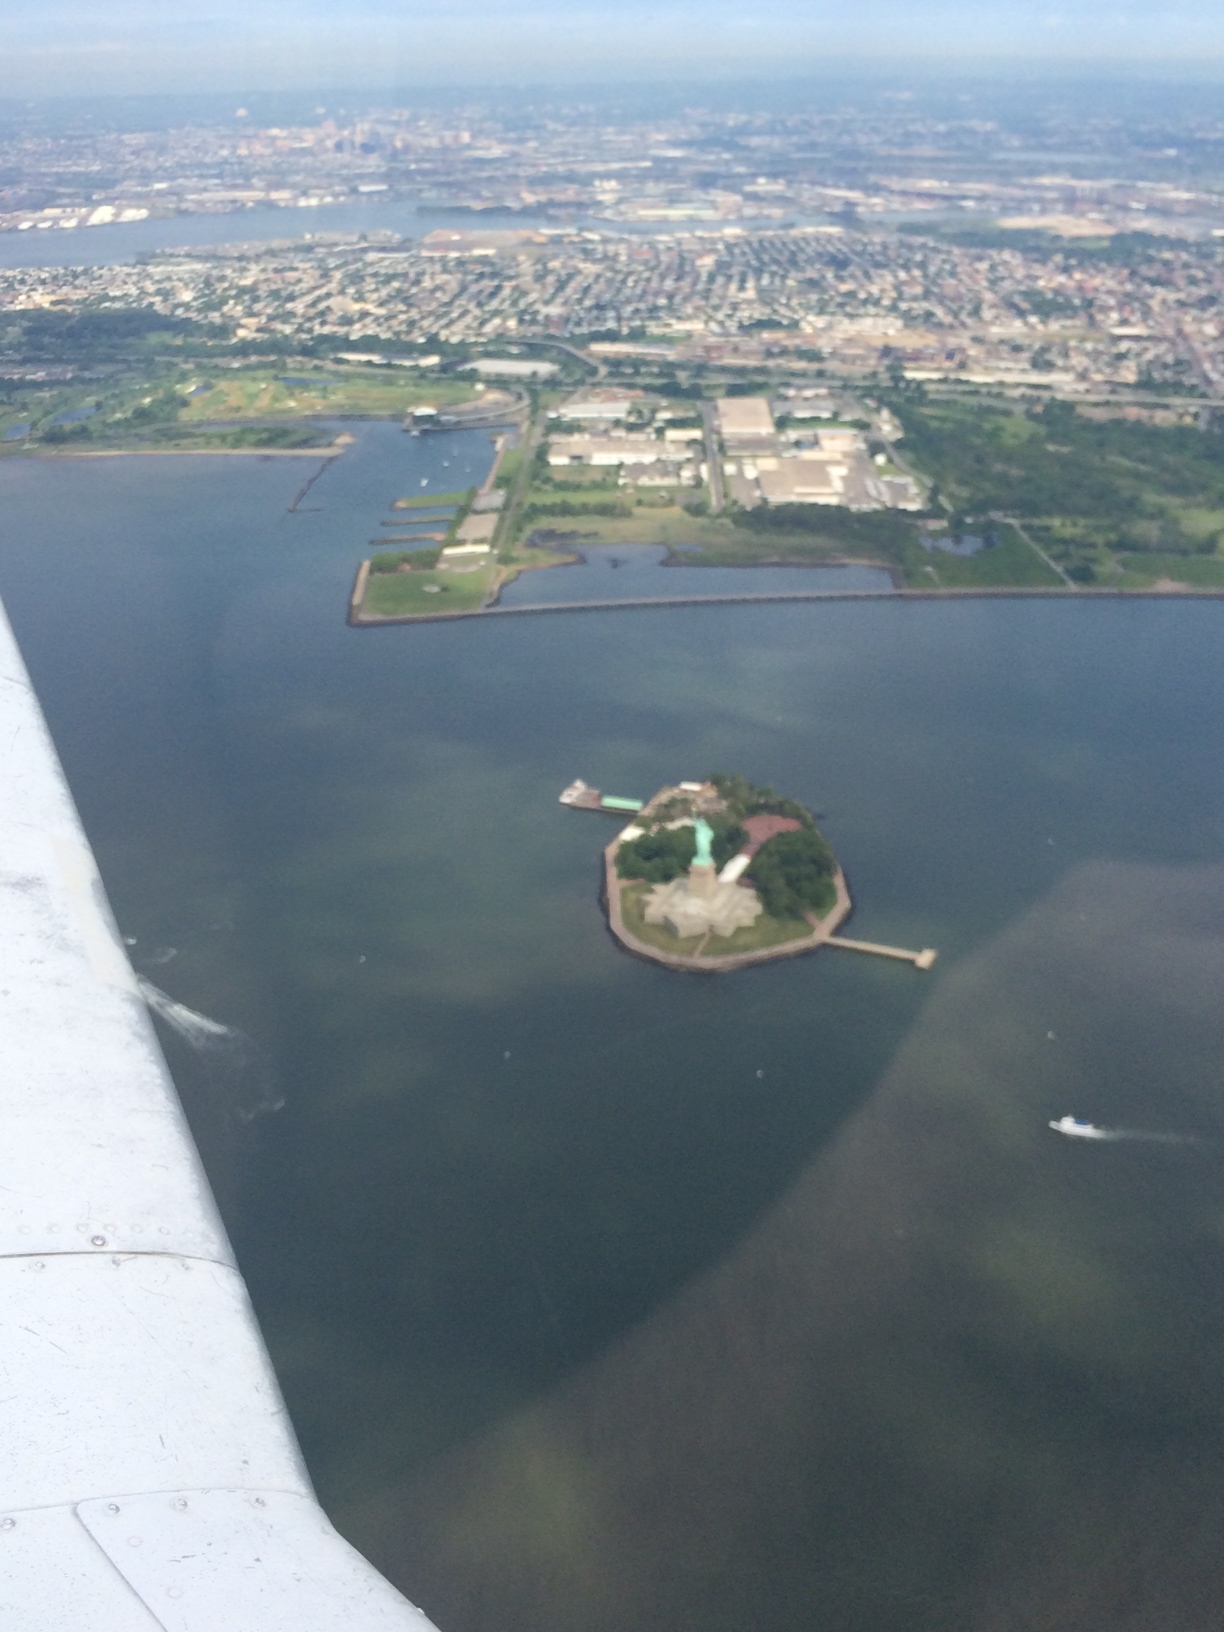 circling the Statue of Liberty